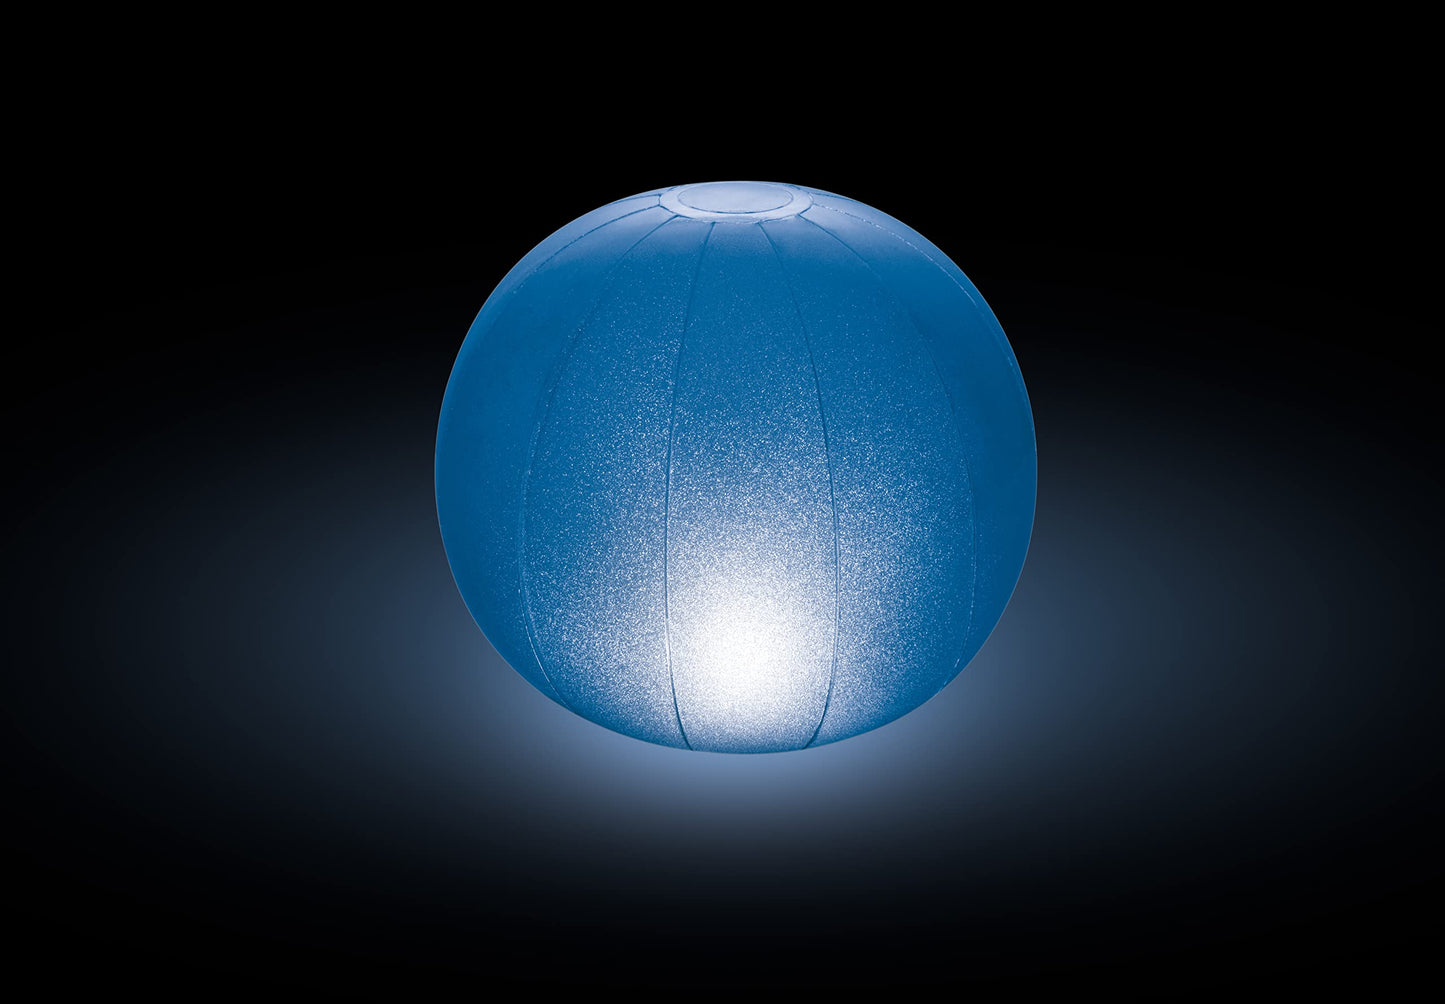 Intex Floating LED Inflatable Ball Light with Multi-Color Illumination, Battery Powered